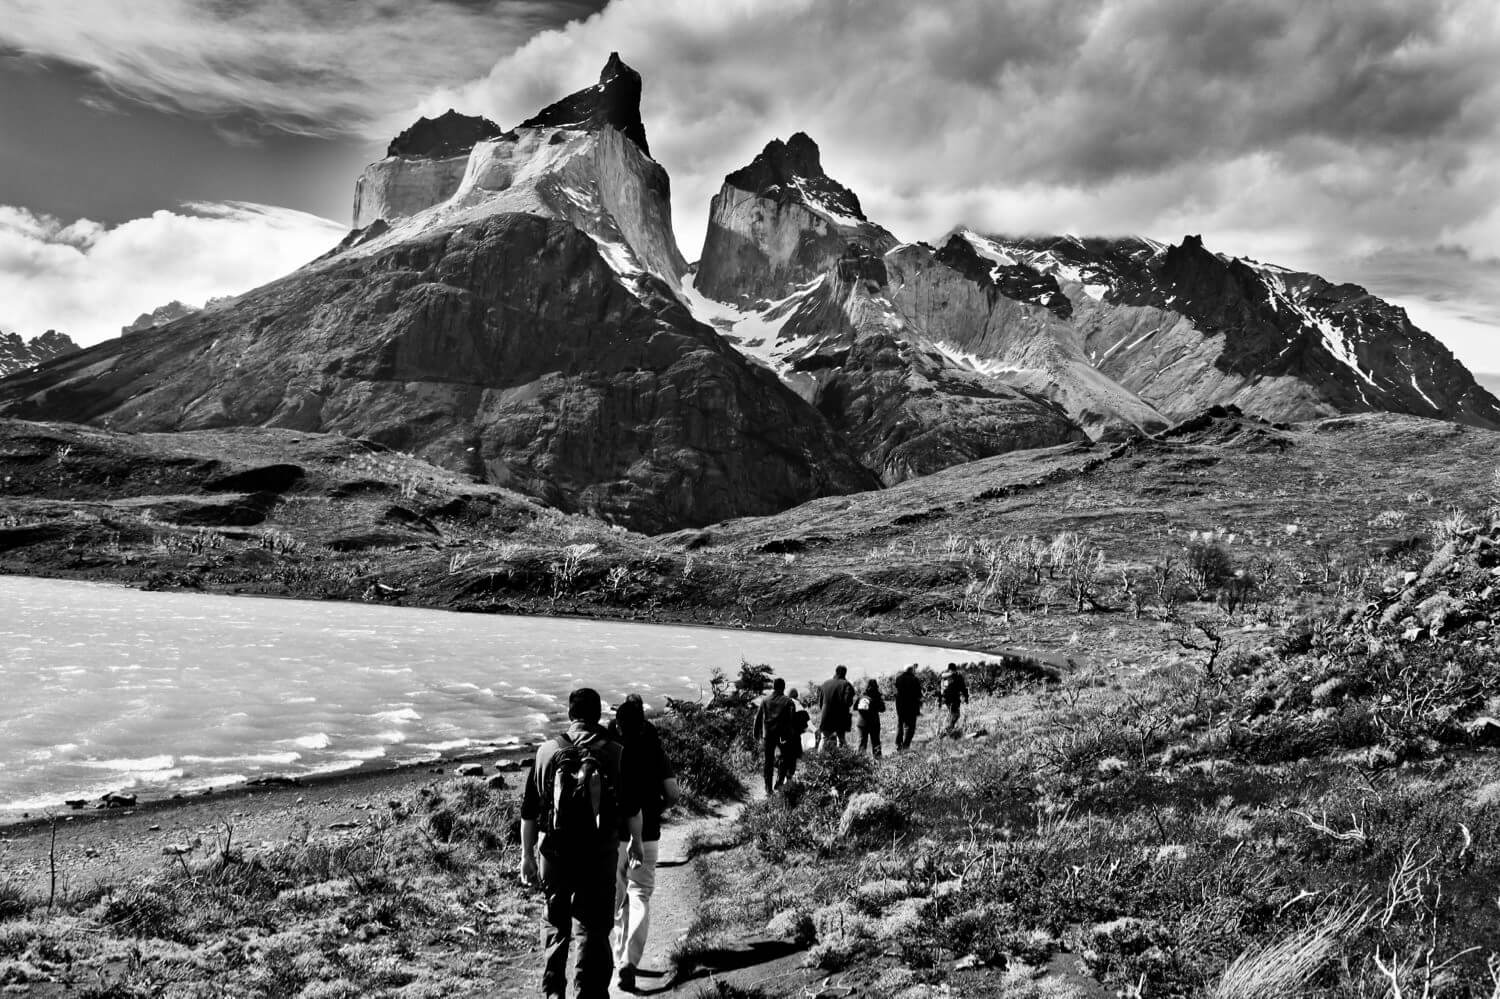 The Horns Torres del Paine hiking